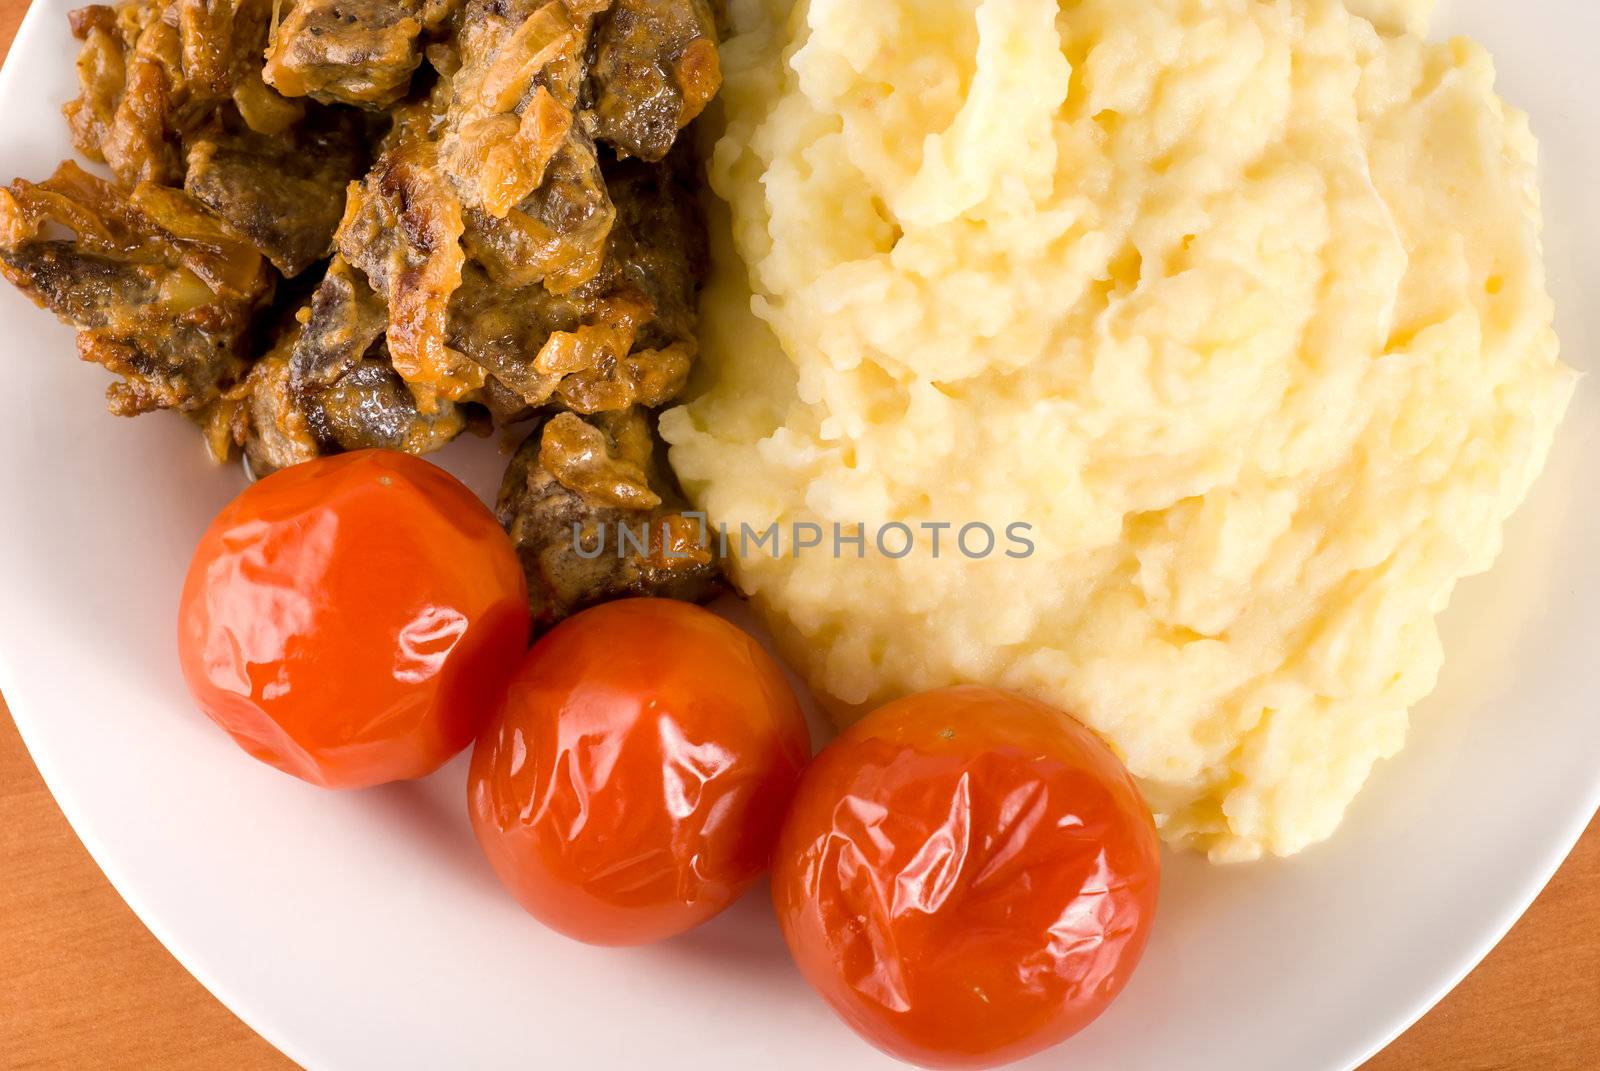 Potatoes with liver by Givaga